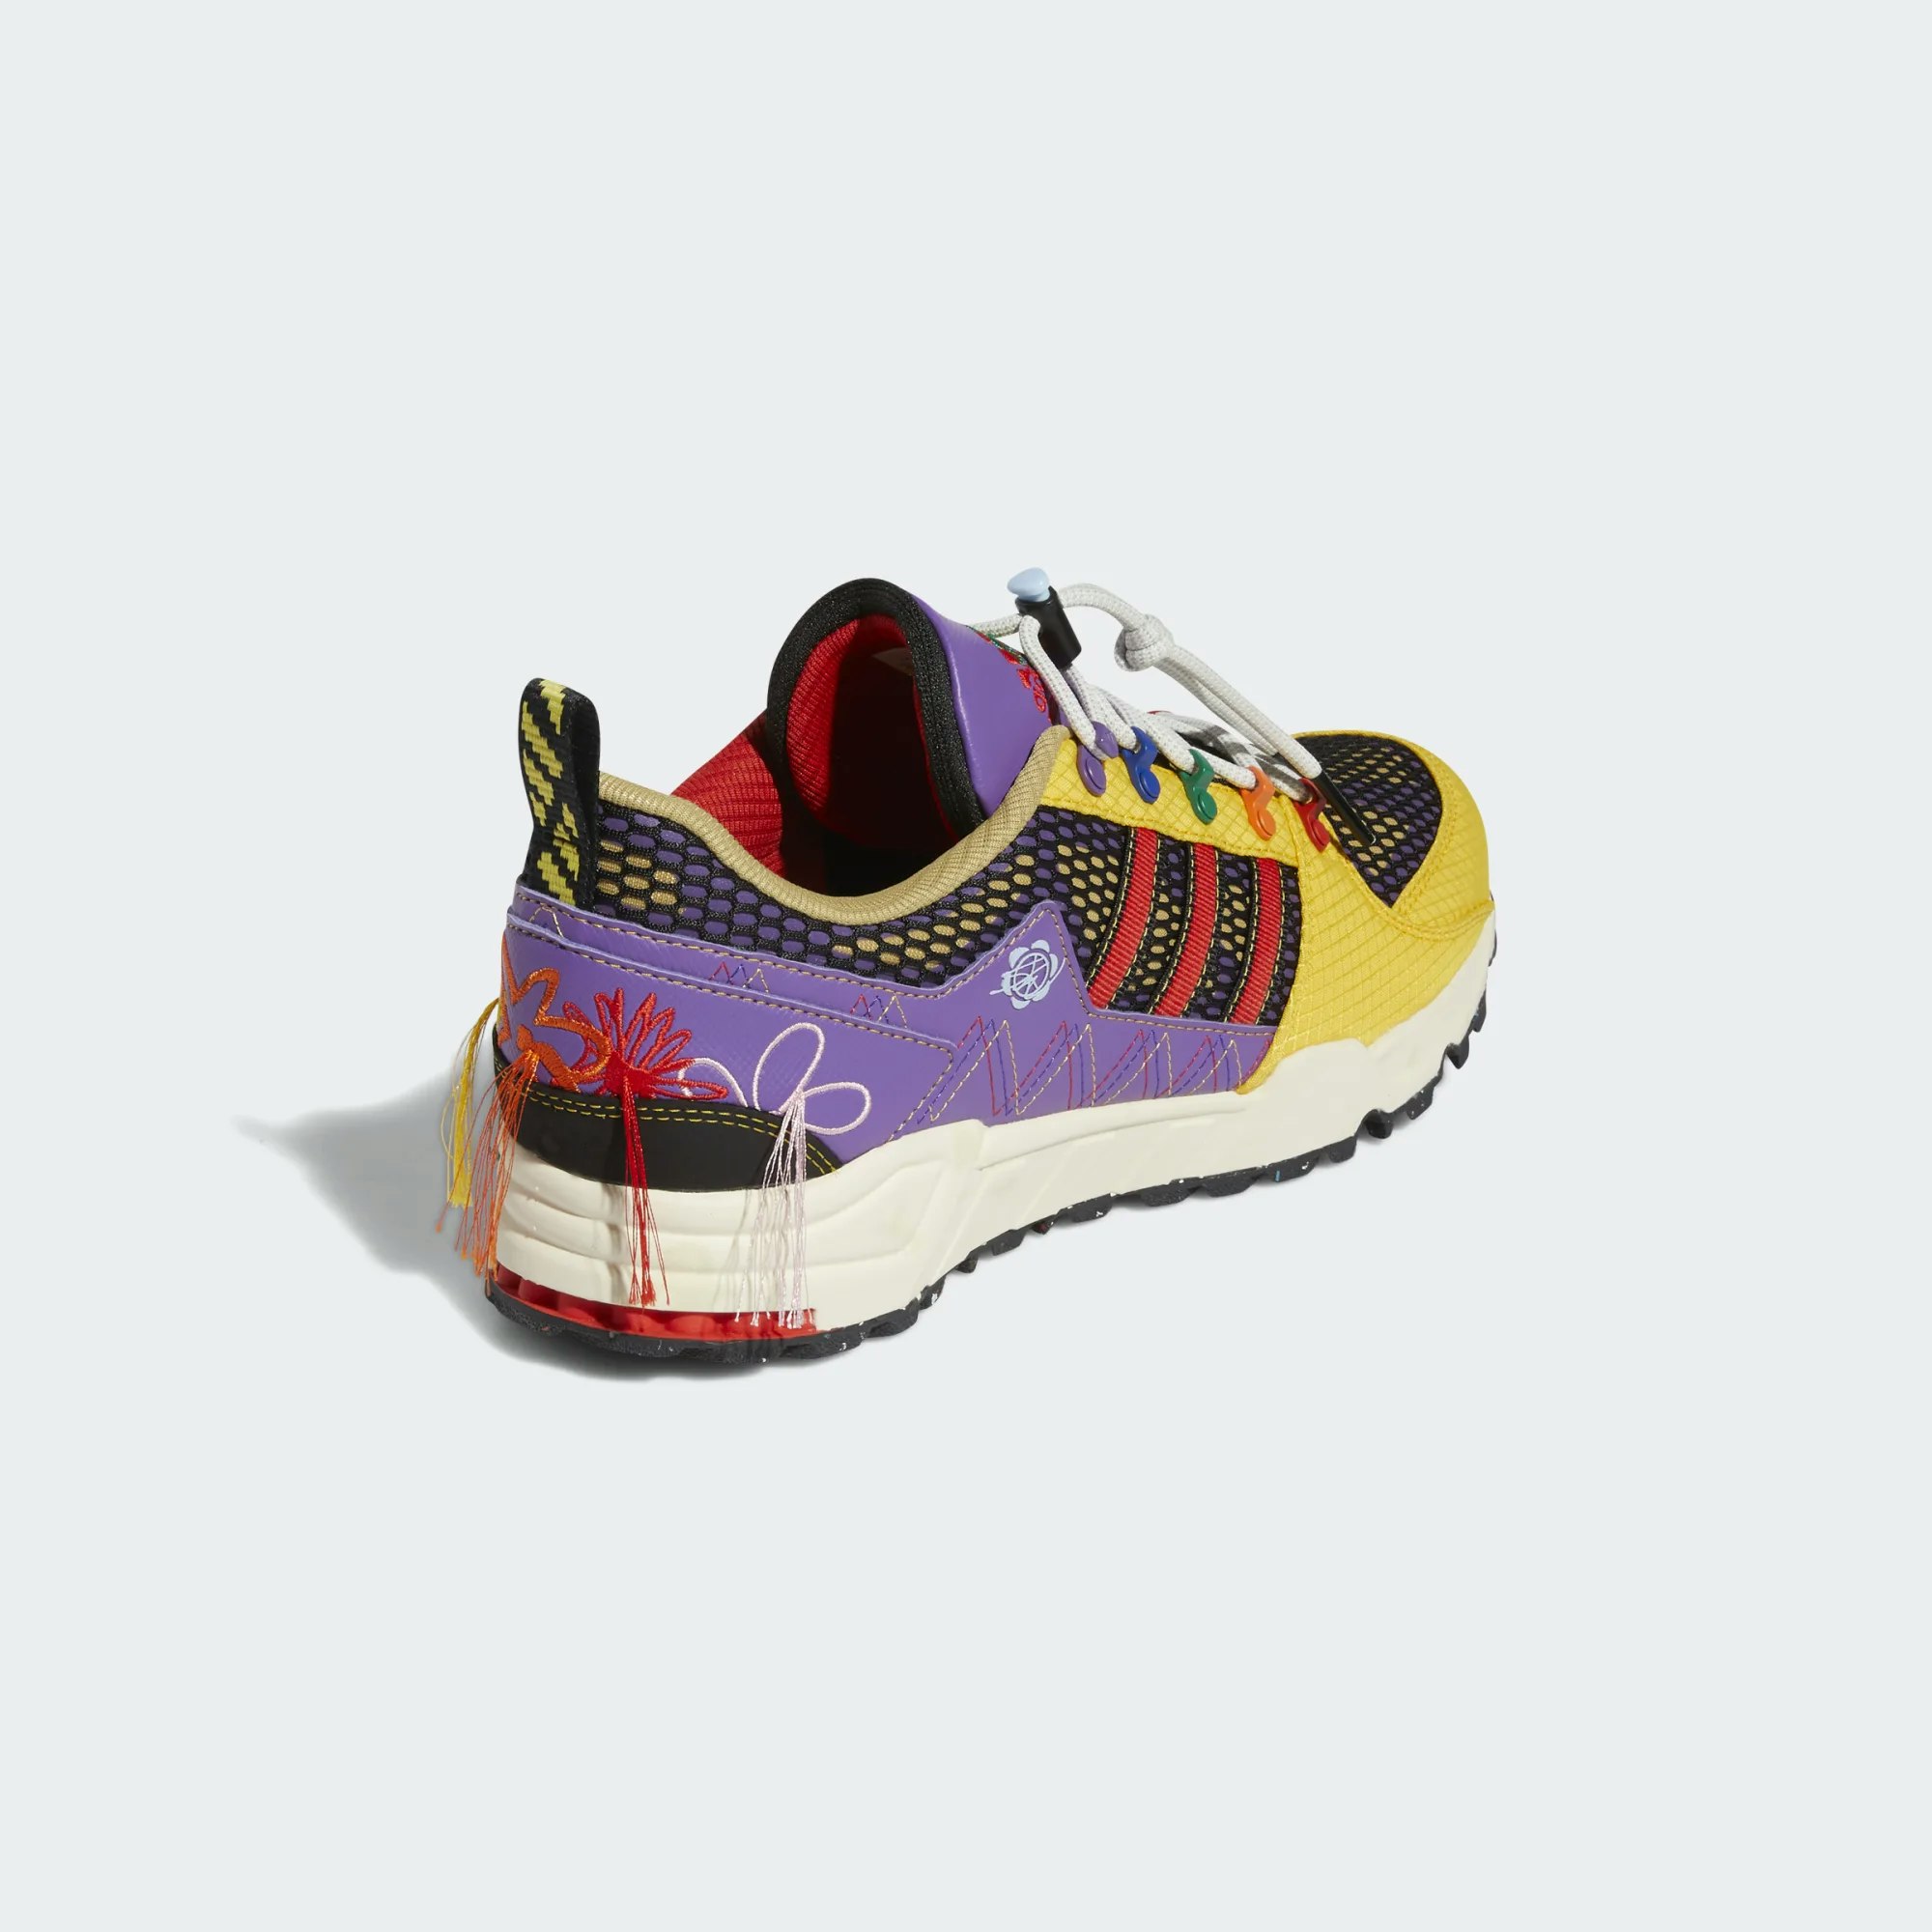 Sean Wotherspoon x adidas EQT Support 93 "SUPEREARTH"